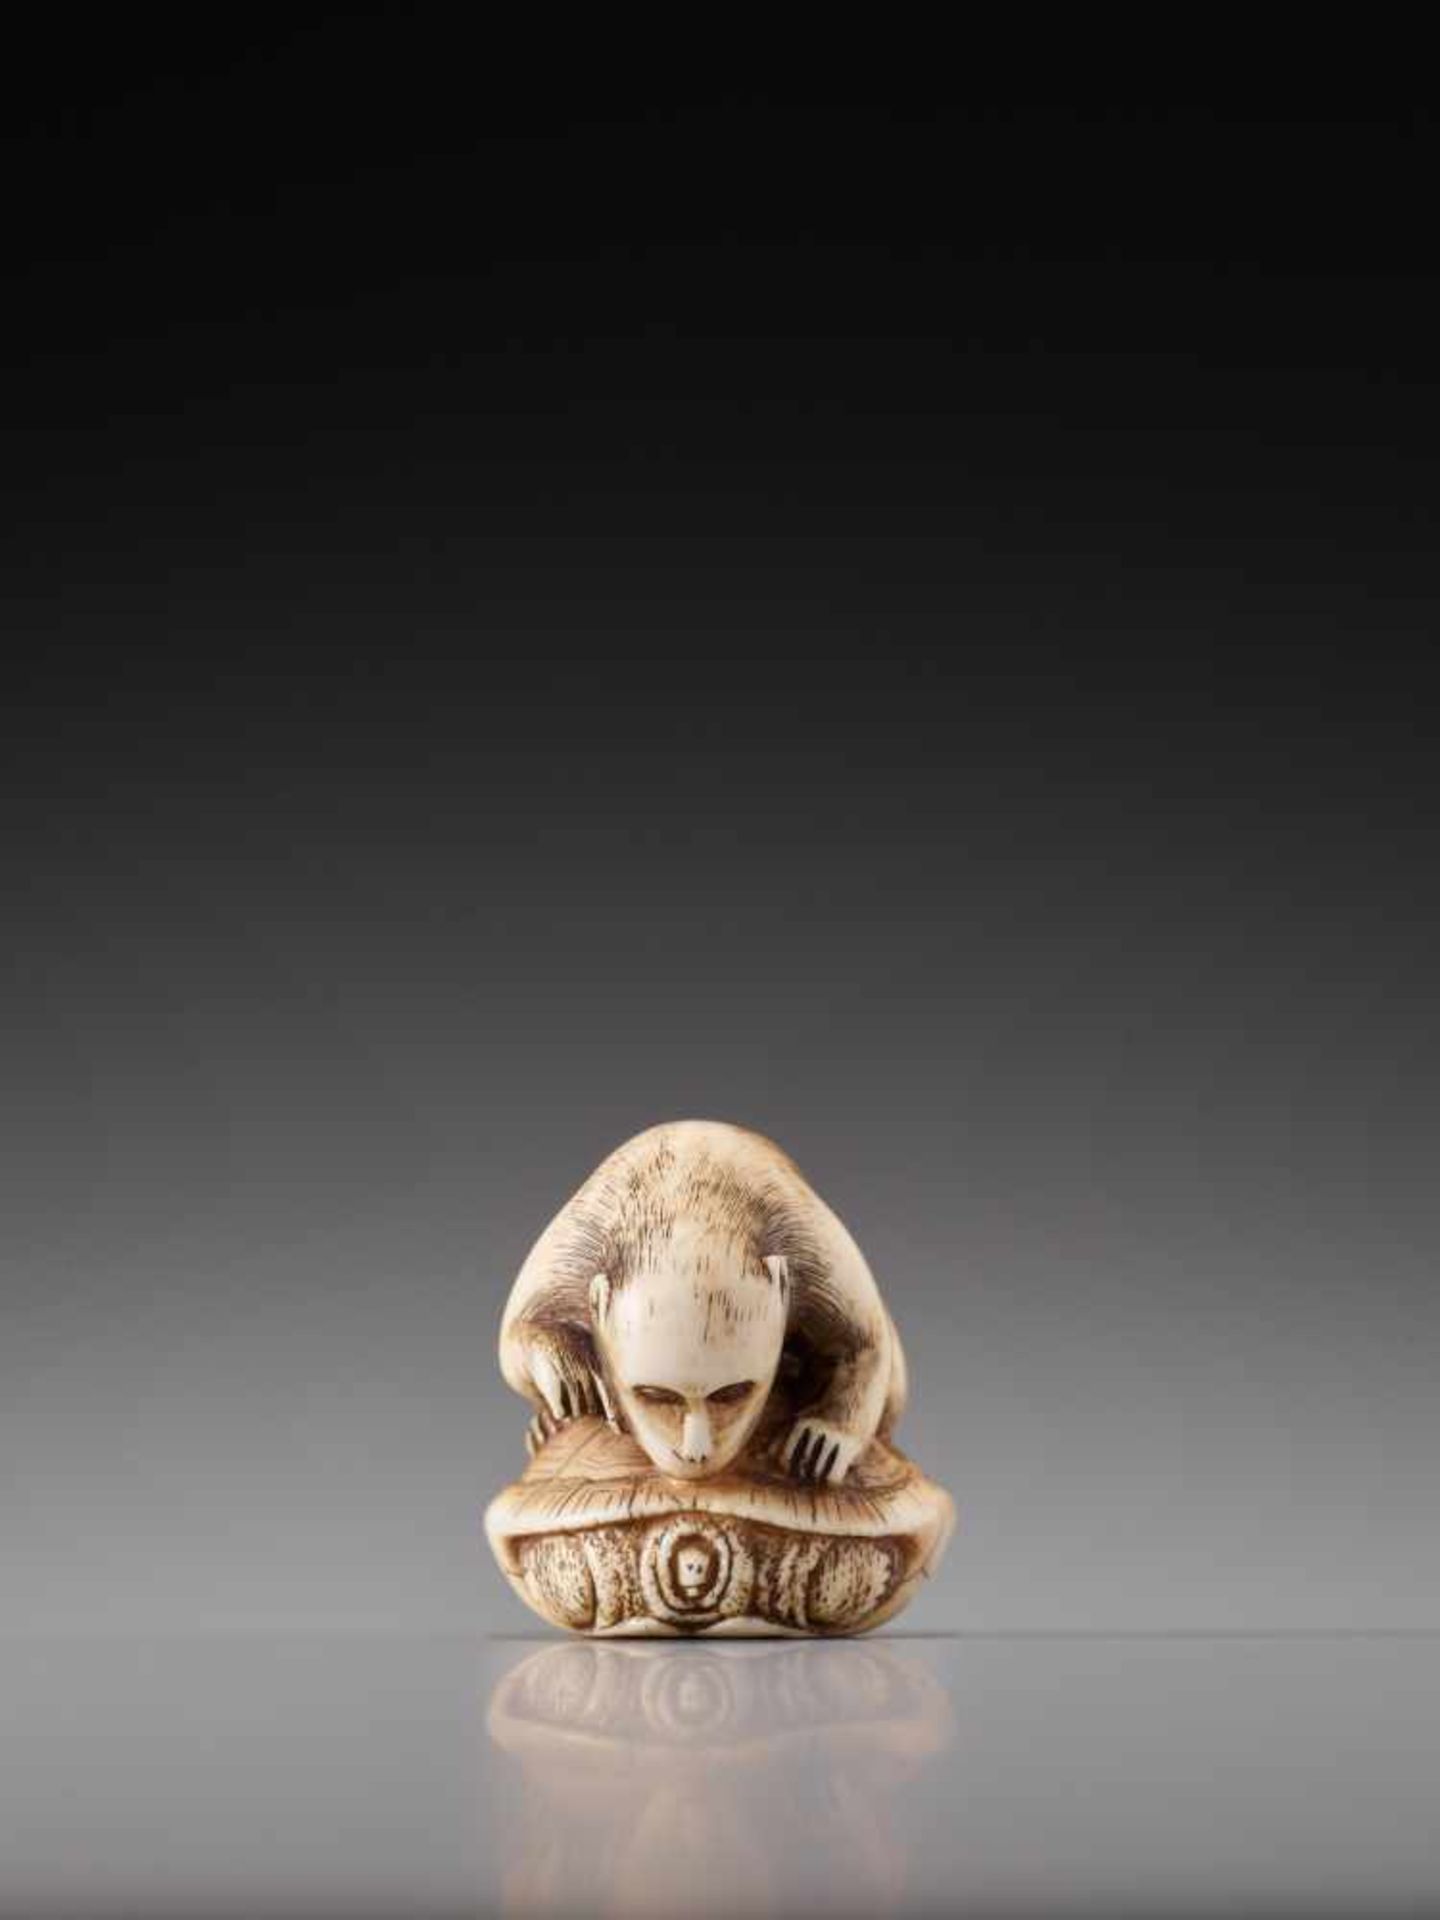 A MAGNIFICENT NETSUKE OF A MONKEY AND TORTOISE BY HOGEN RANTEIIvory netsukeJapan, Kyotolate 18th - Image 4 of 10